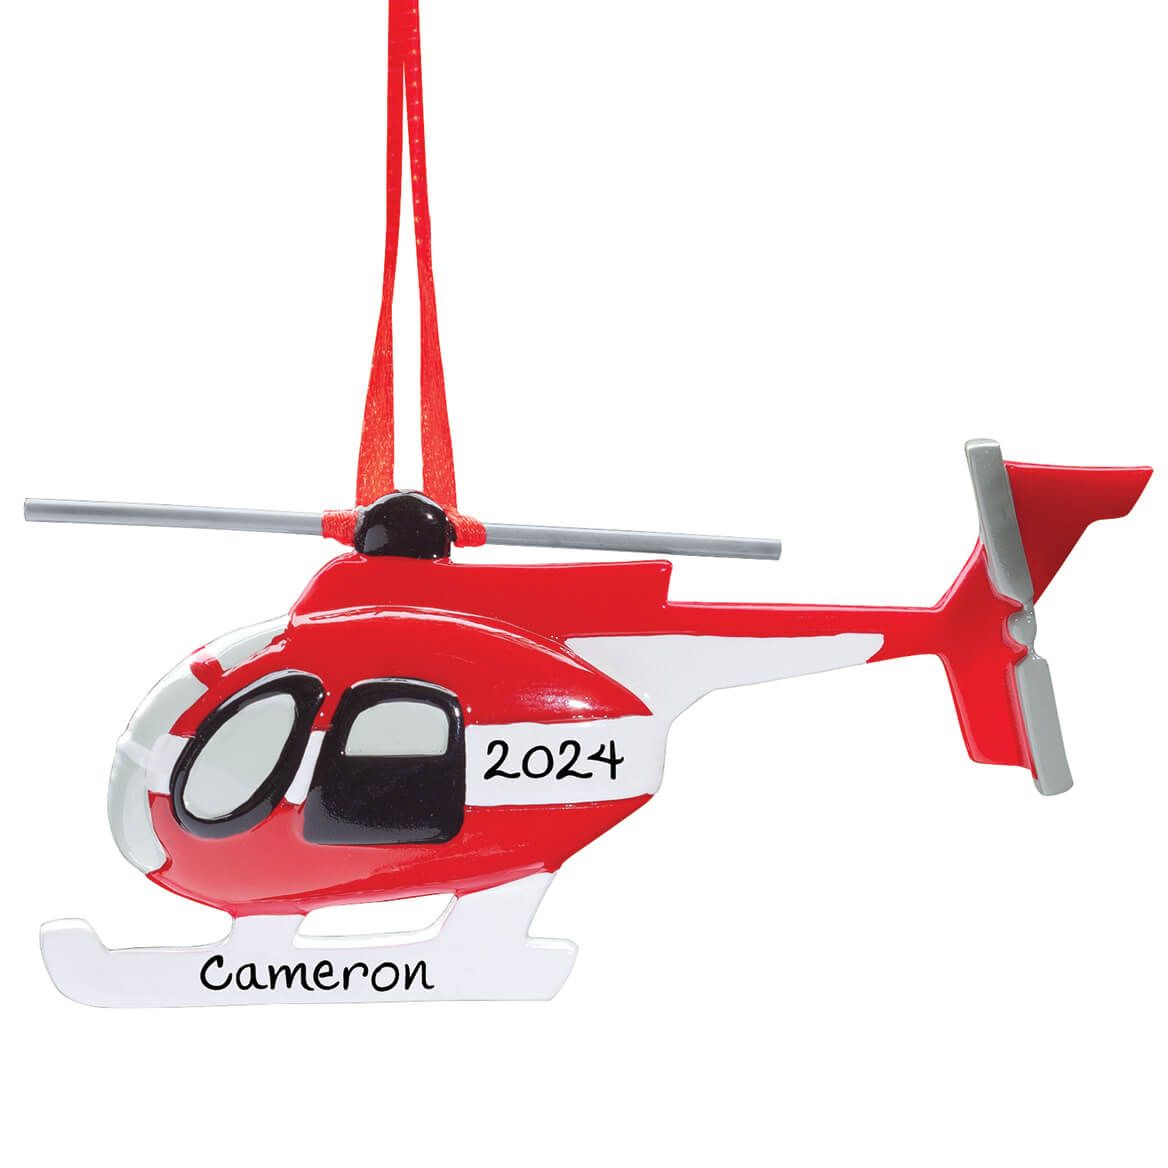 Personalized Helicopter Ornament + '-' + 353317